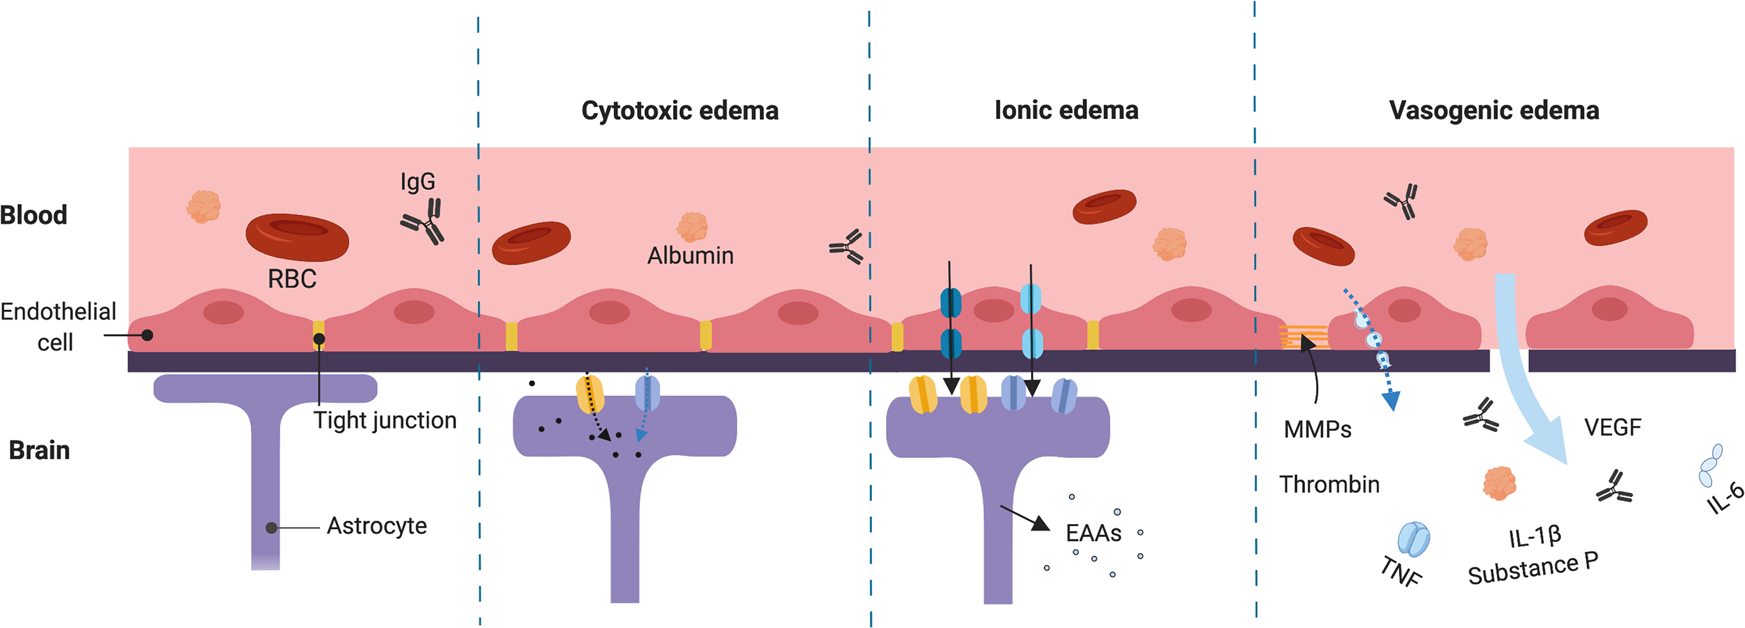 Drug development in targeting ion channels for brain edema | Acta  Pharmacologica Sinica